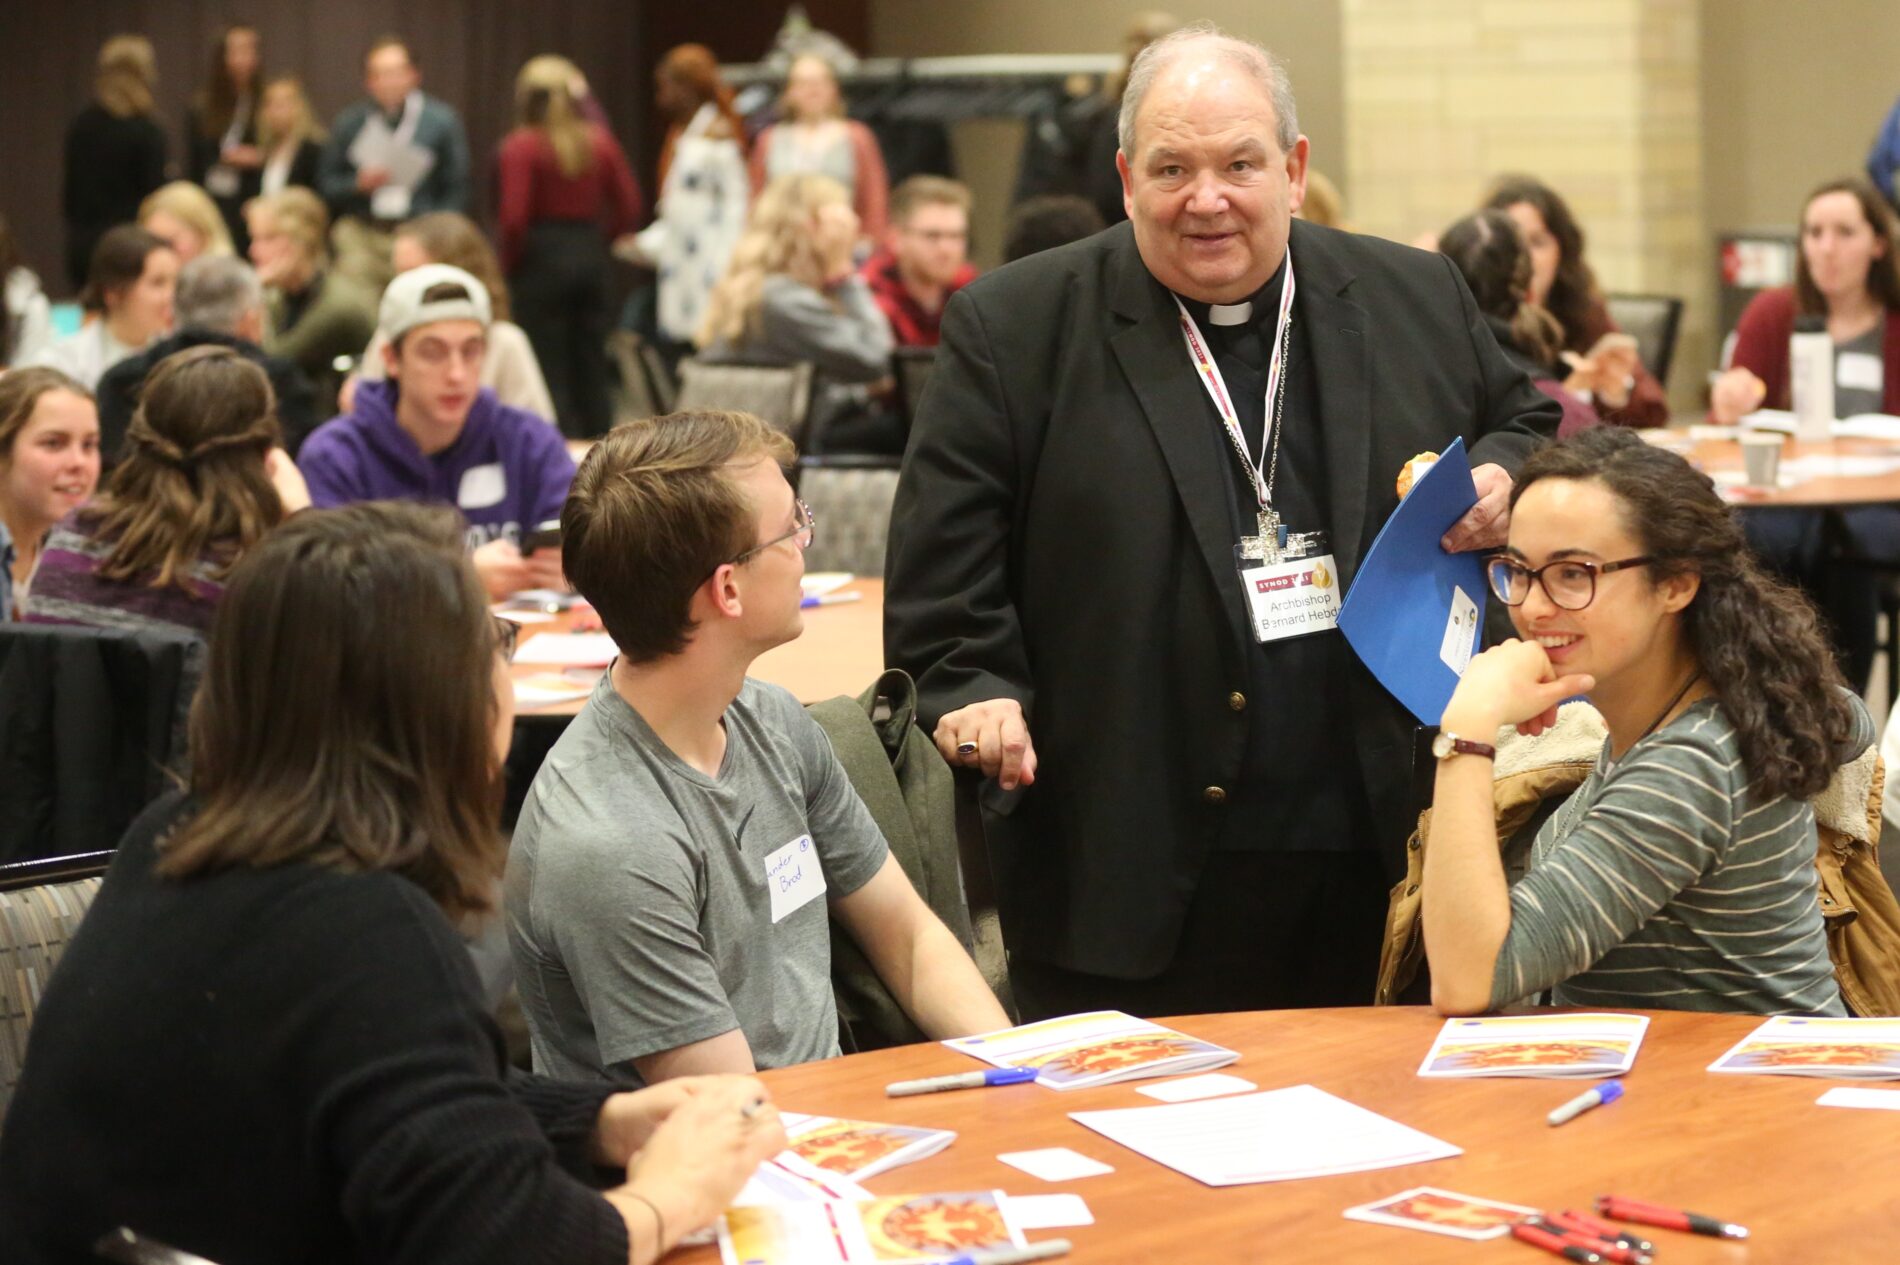 Archbishop speaks with young adults gathered for a Prayer and Listening Event.